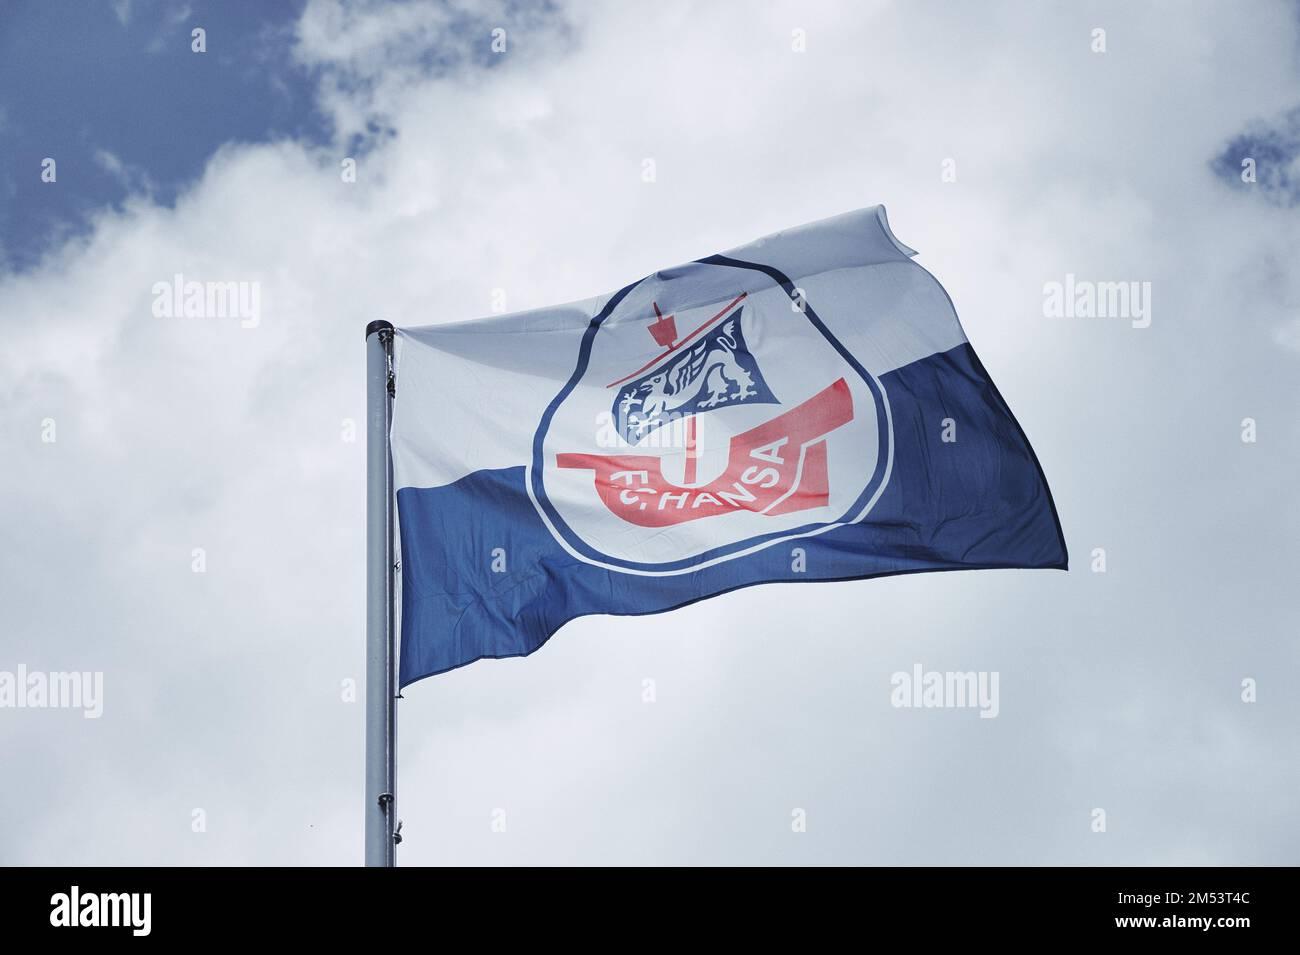 The FC Hansa Rostock flag blowing in the wind with a cloudy sky in